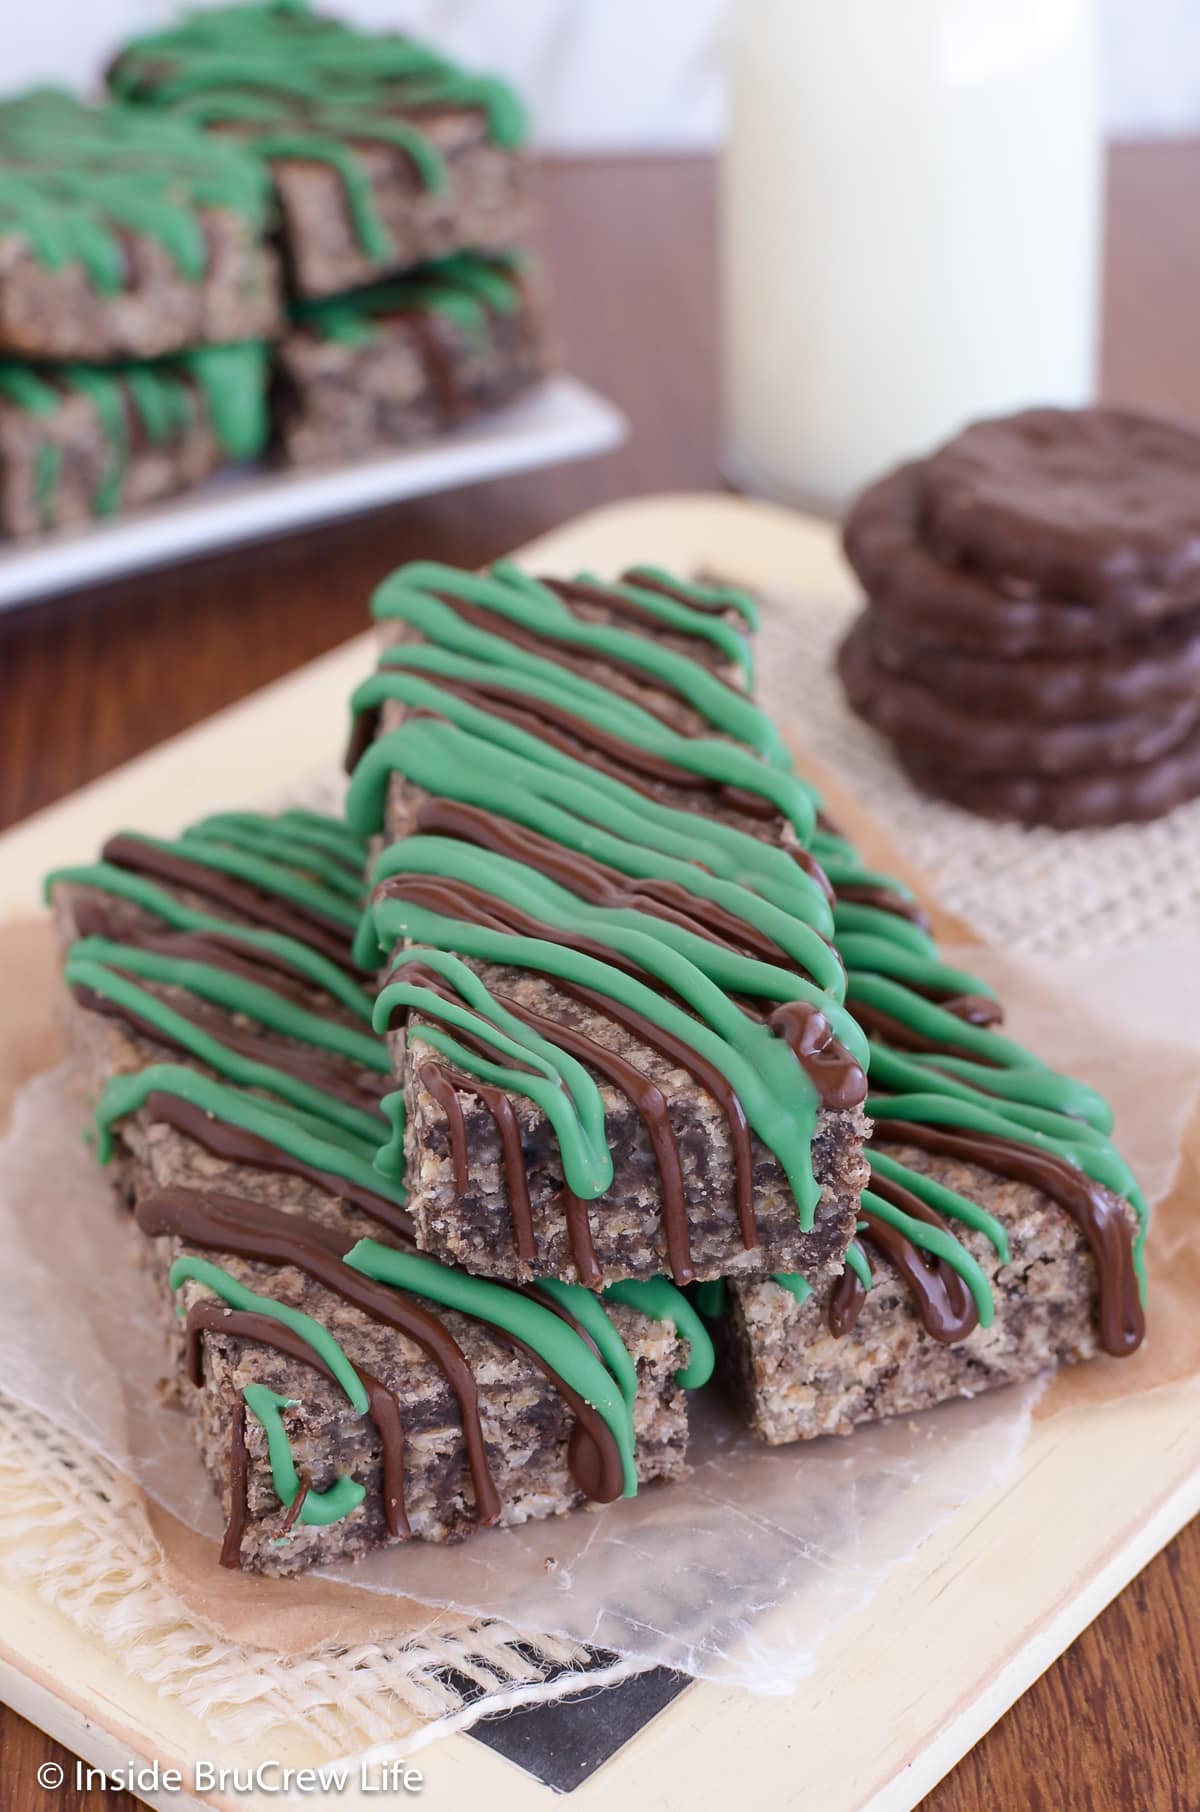 A pile of chocolate granola bars with green chocolate drizzles.